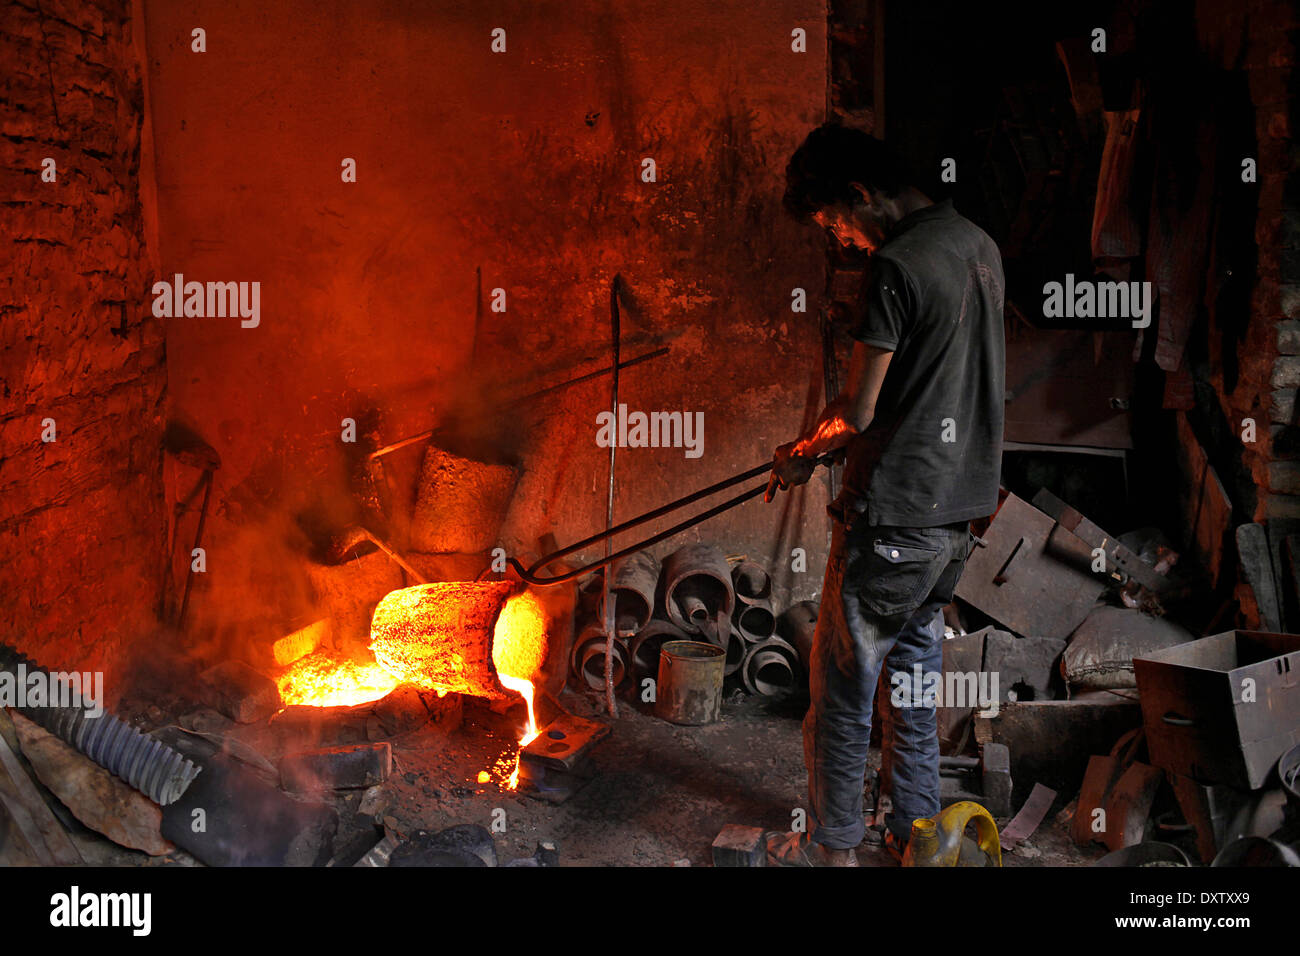 DHAKA, BANGLADESH, MARCH 2014. A worker working in a Metal factory without proper safety gear or tools.  Bangladeshi workers work in a limited workplace in often cramped conditions and without much in the way of safety equipment. Even those working in a Metal factory do so without masks or gloves exposing them to the risk of accidents or diseases. (Photo by Sumon Yusuf / Pacific Press) Stock Photo